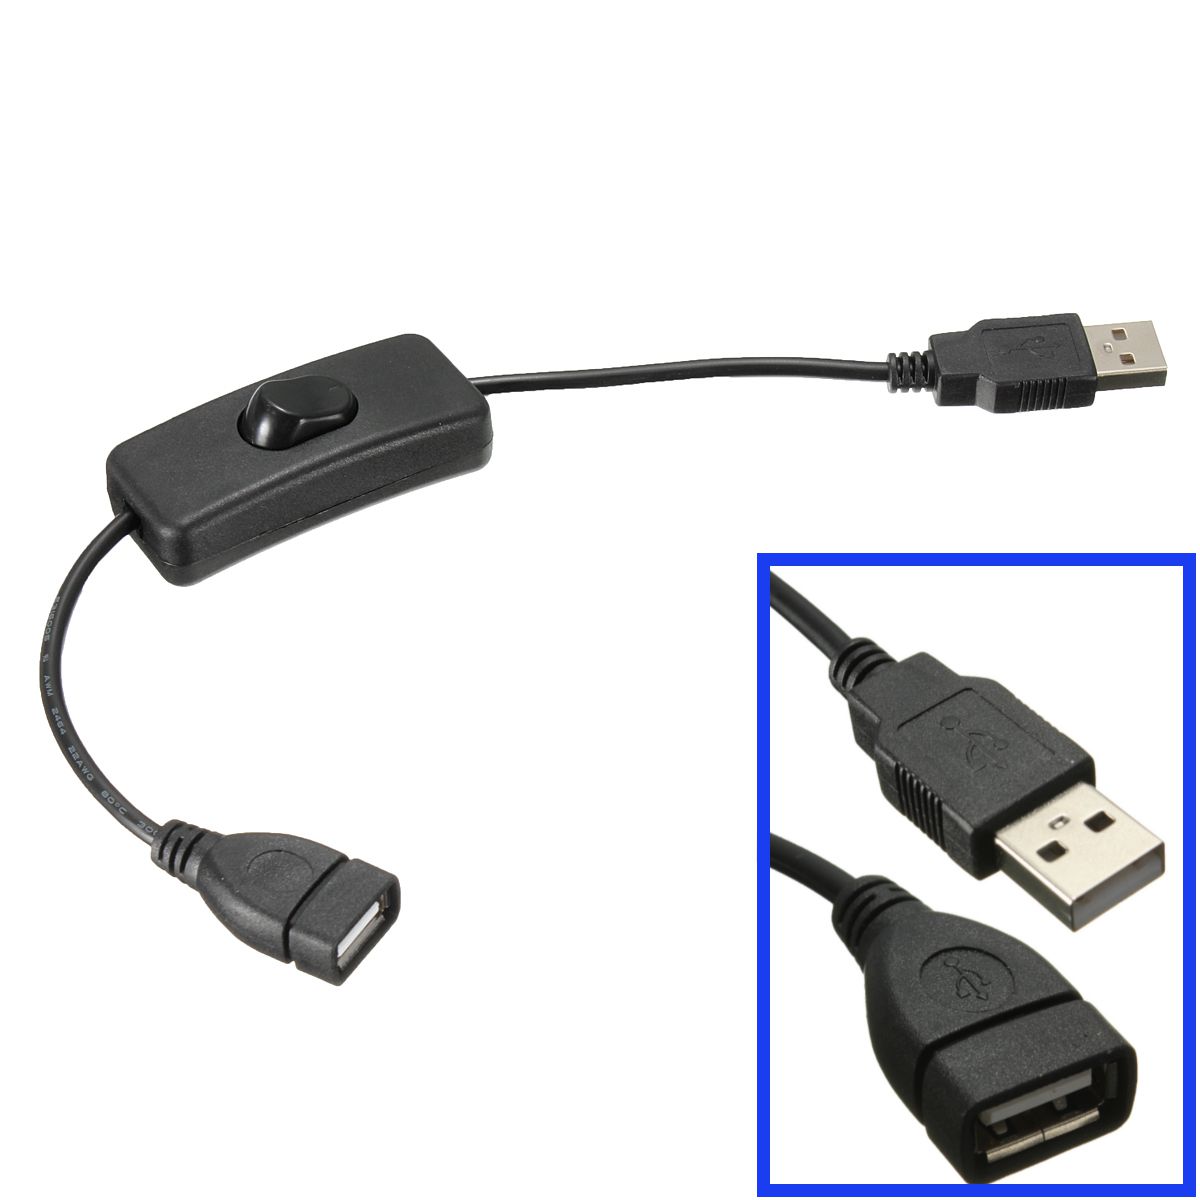 5PCS-USB-Power-Cable-With-OnOff-Switch-For-Raspberry-Pi-1218763